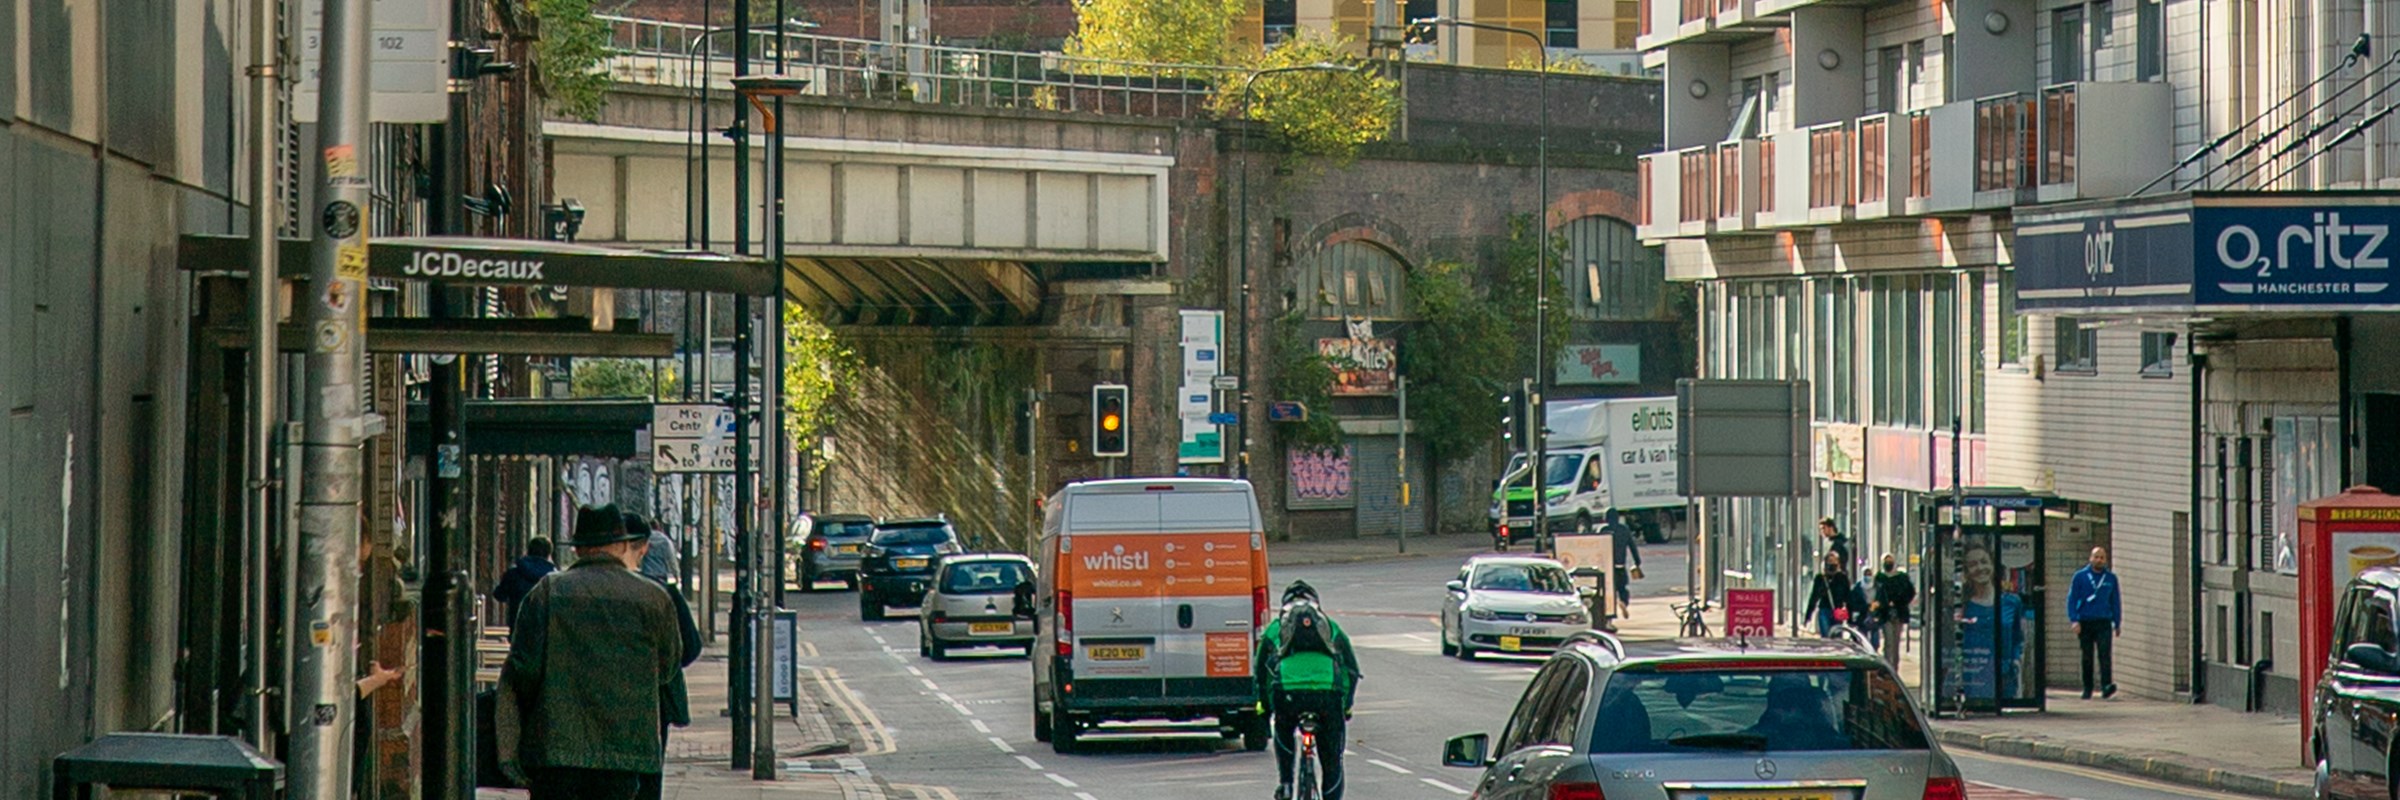 Busy road in Manchester city centre with pedestrians walking on pavements, cars and a cyclist use the road heading towards a bridge, buildings can be seen in the background.